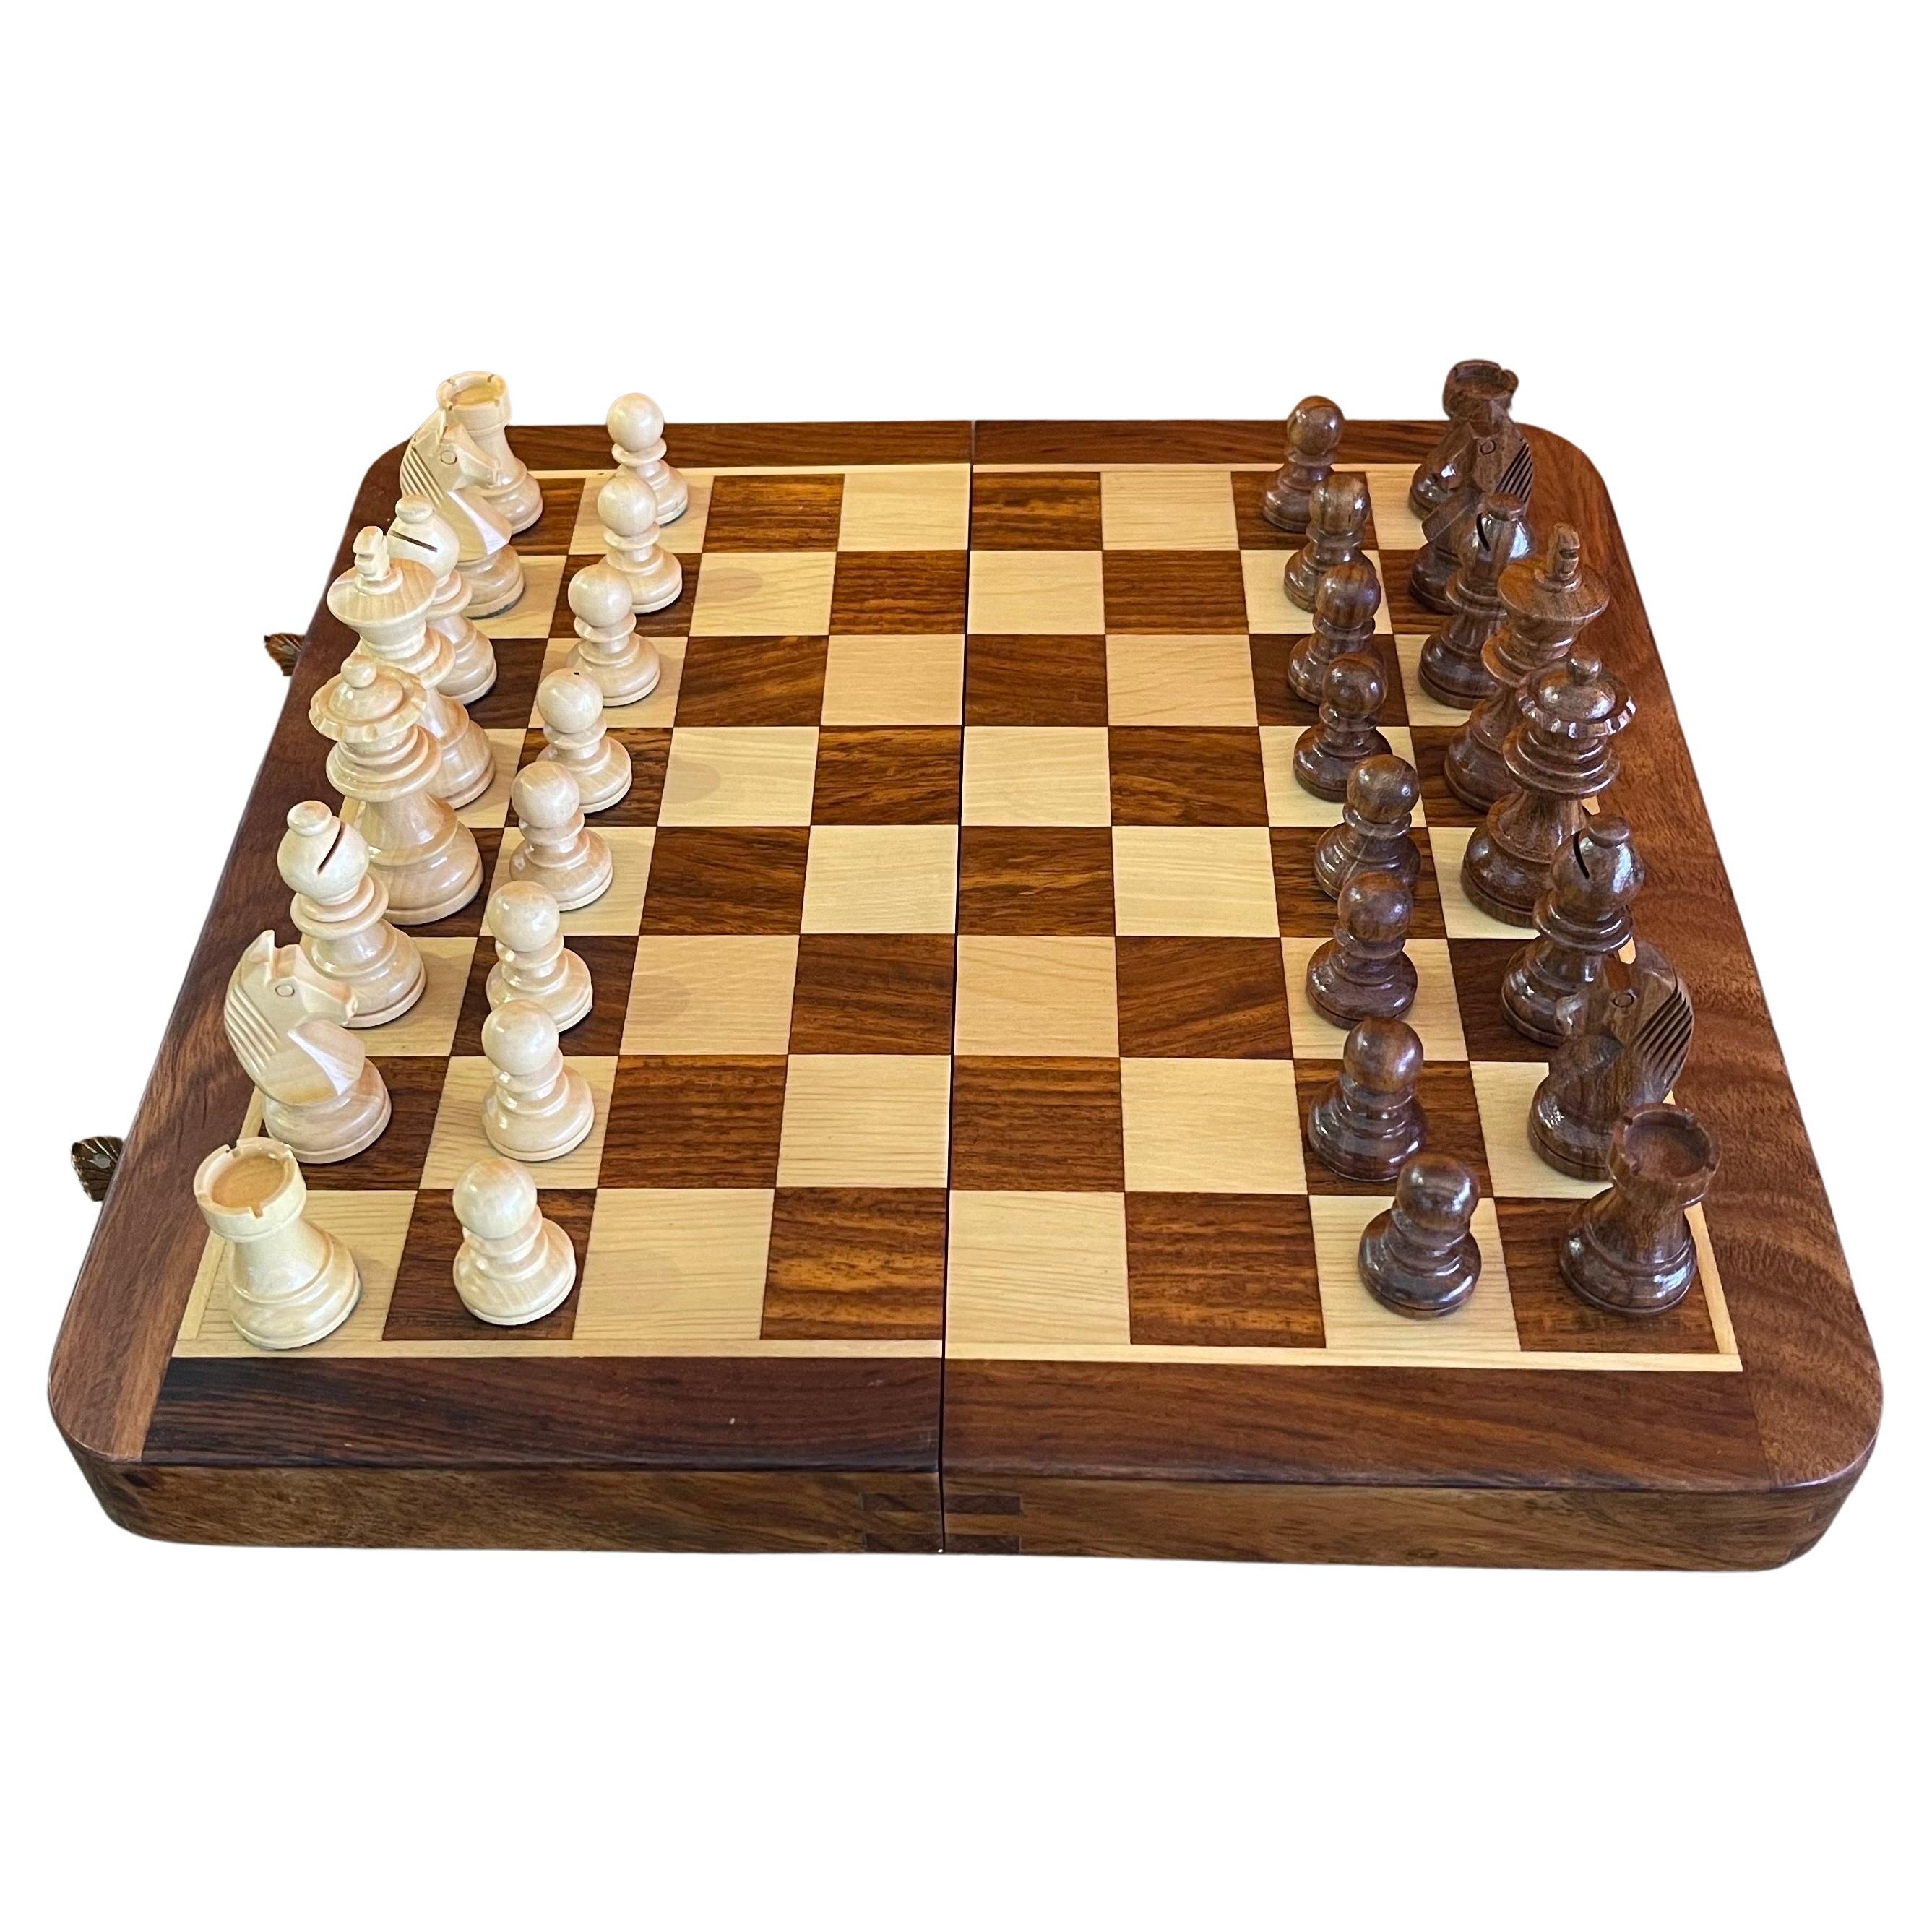 A really nice vintage, high quality solid wood chess set made in Treviso, Italy by Dal Negro, circa 1980s. The set is a portable travel set; the board can be folded in half with the pieces stored inside. Each piece is magnetized and stays put when